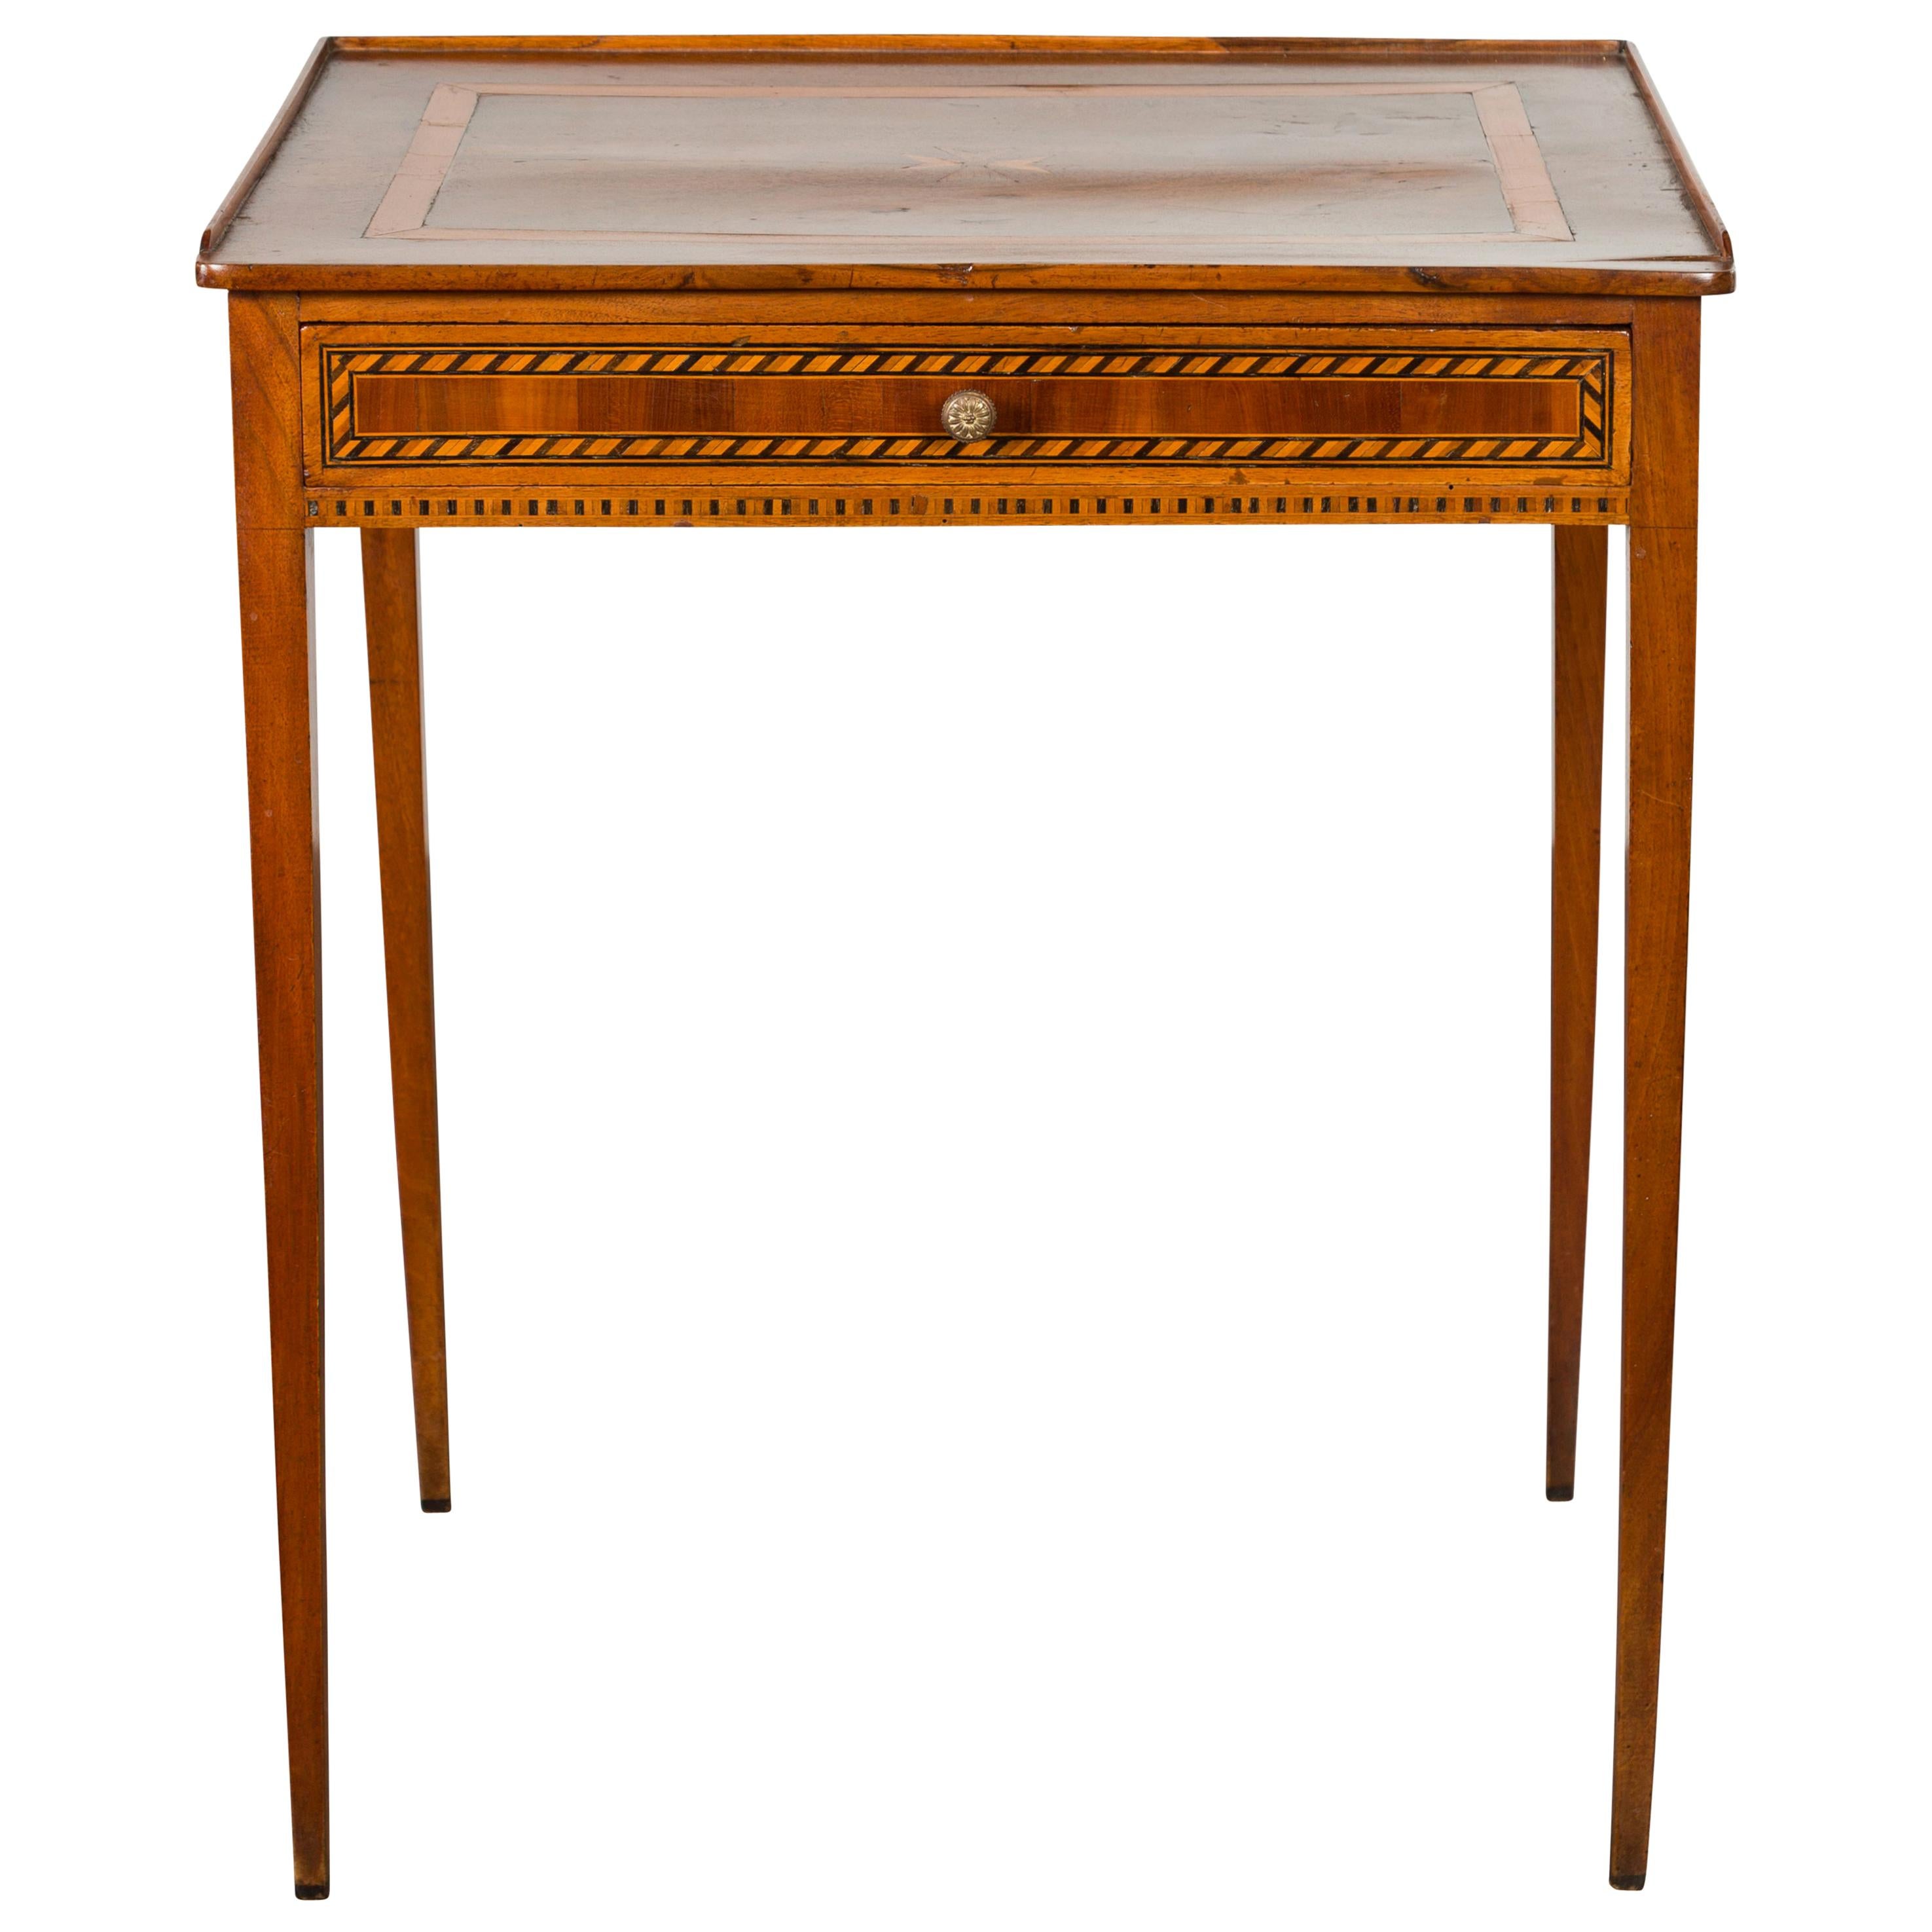 French 1870s Napoléon III Walnut Side Table with Star Inlay and Single Drawer